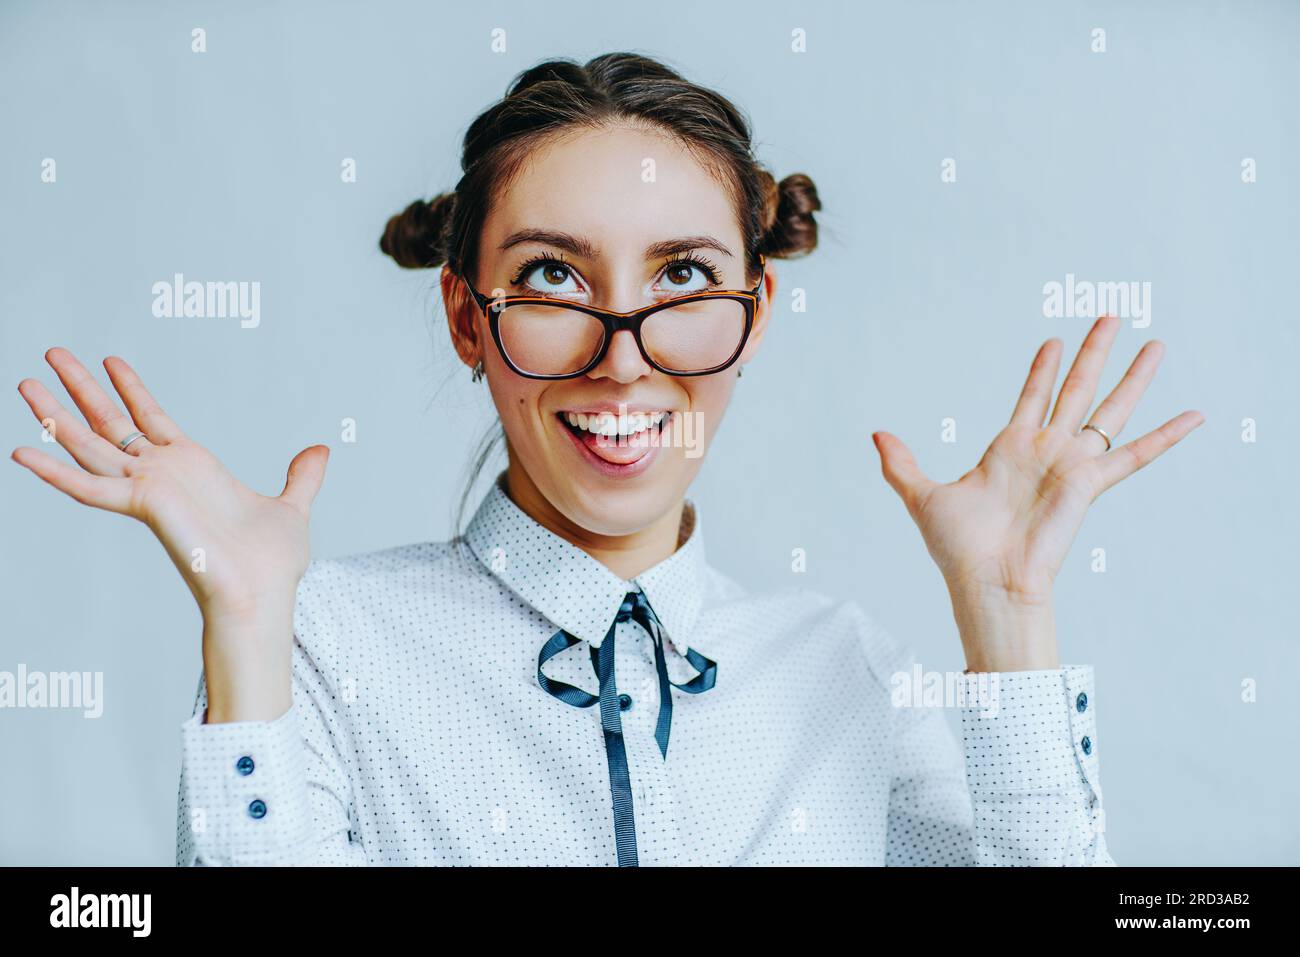 Young business woman funny portrait with glasses on white wall background Stock Photo